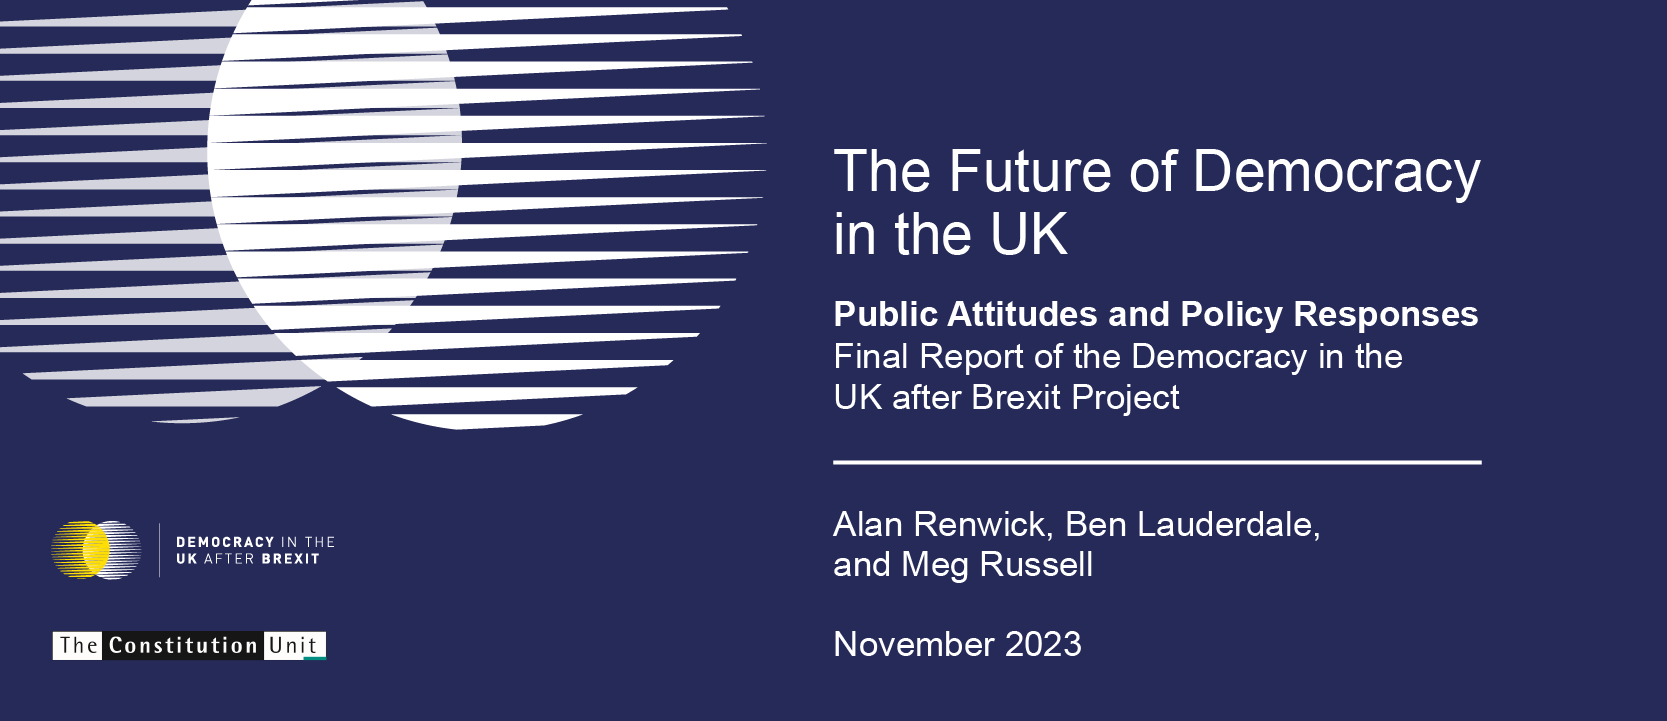 A cropped and rearranged version of the front cover of the report